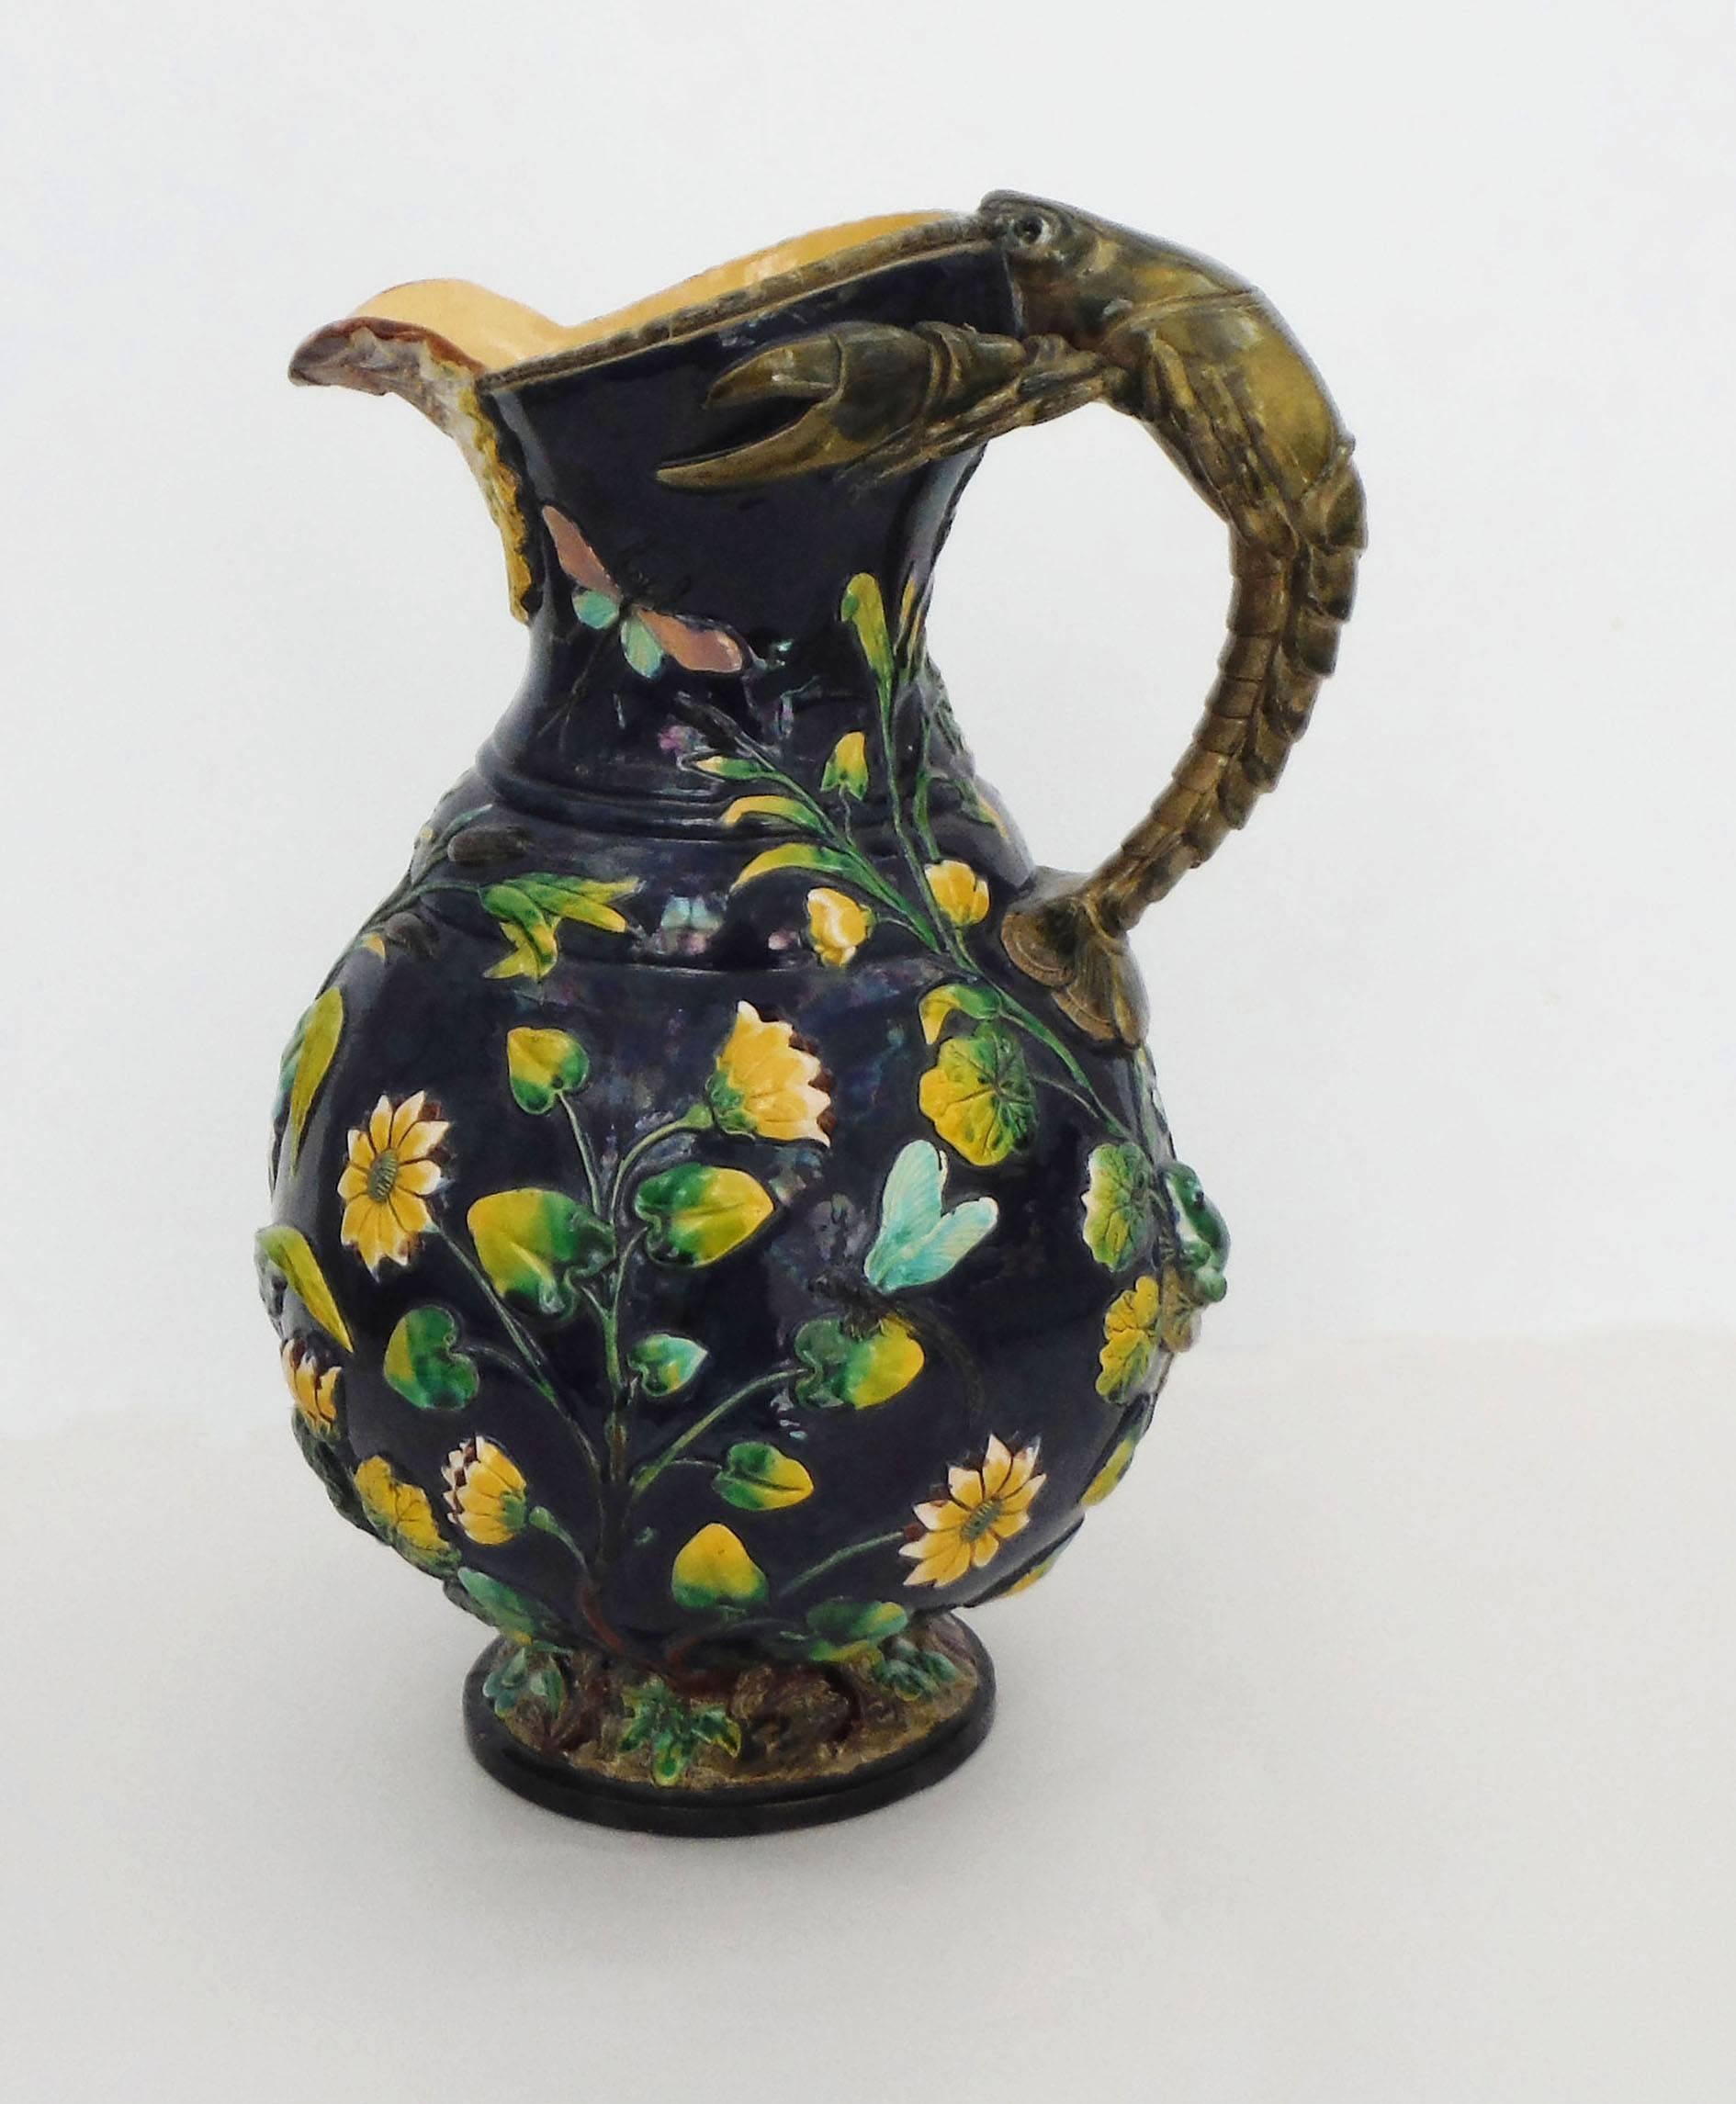 Monumental 19th Century Majolica ewer with crawfish handle, dragonfly snail, grasshopper, frog and aquatics plants, signed Wilhelm Schiller & Son.
A Fine quality for this large ewer and an extraordinary example of the naturalism of the 19th